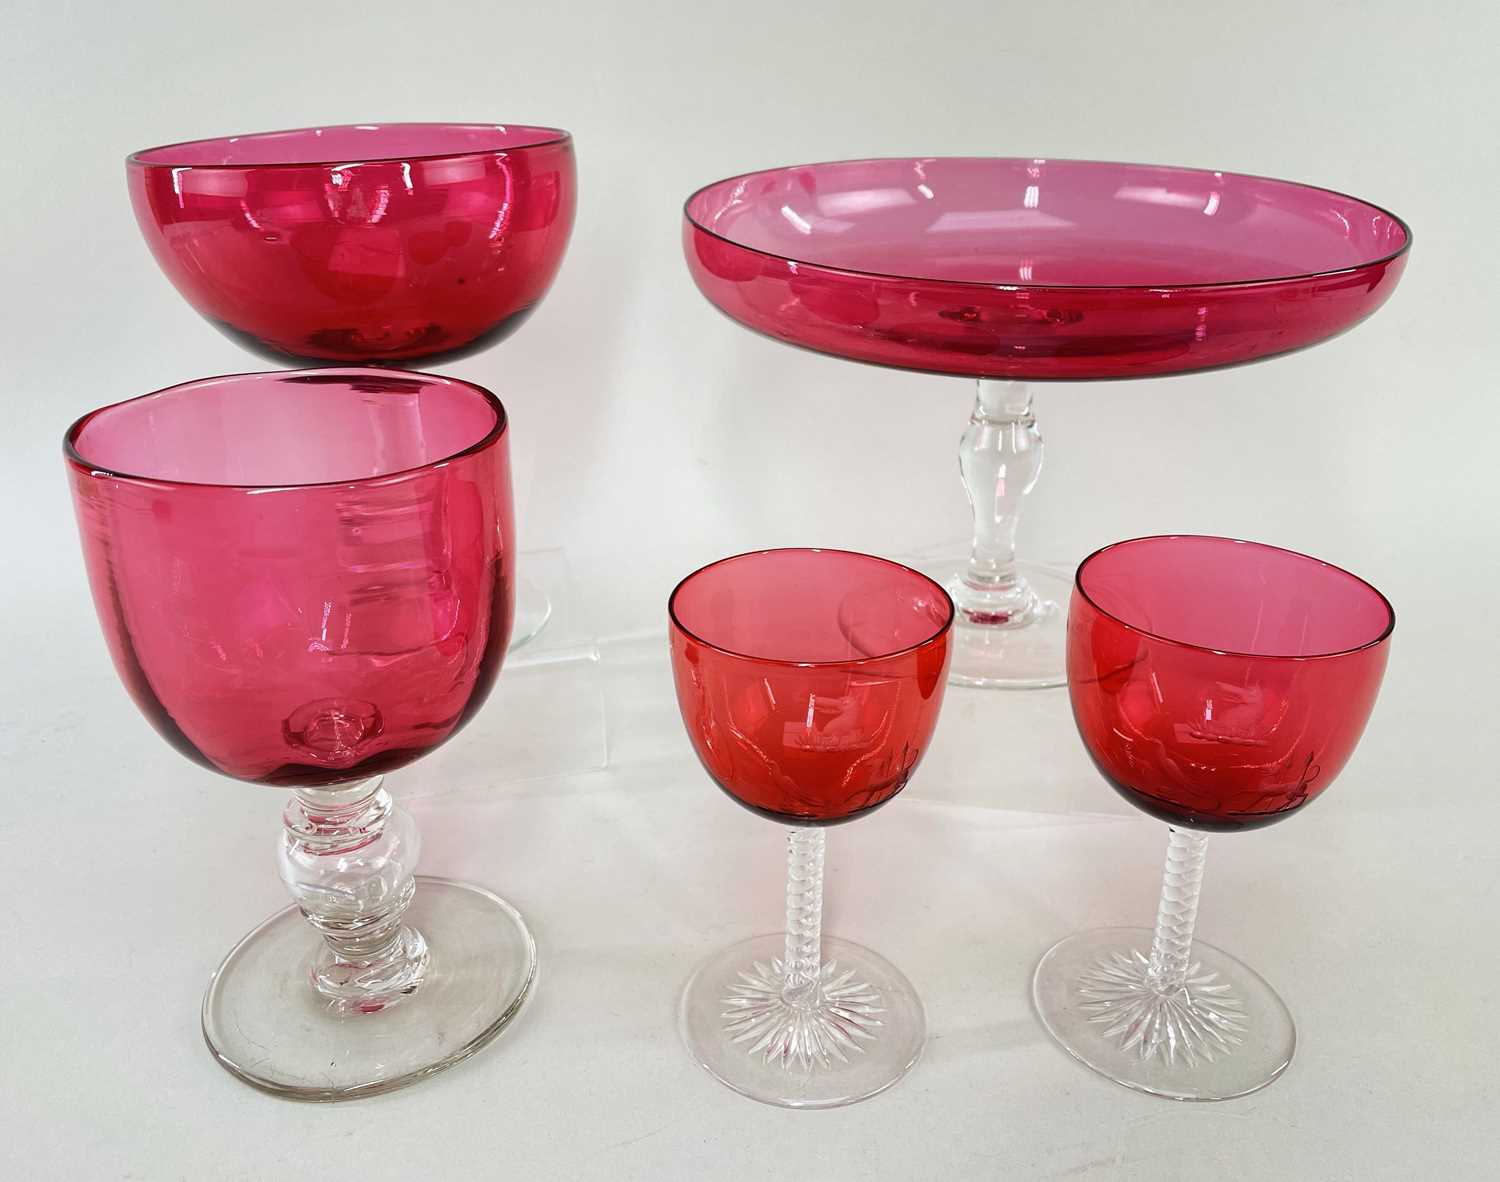 FIVE EDWARDIAN CRANBERRY GLASS STEMMED VESSELS, including pair wine goblets finely engraved with